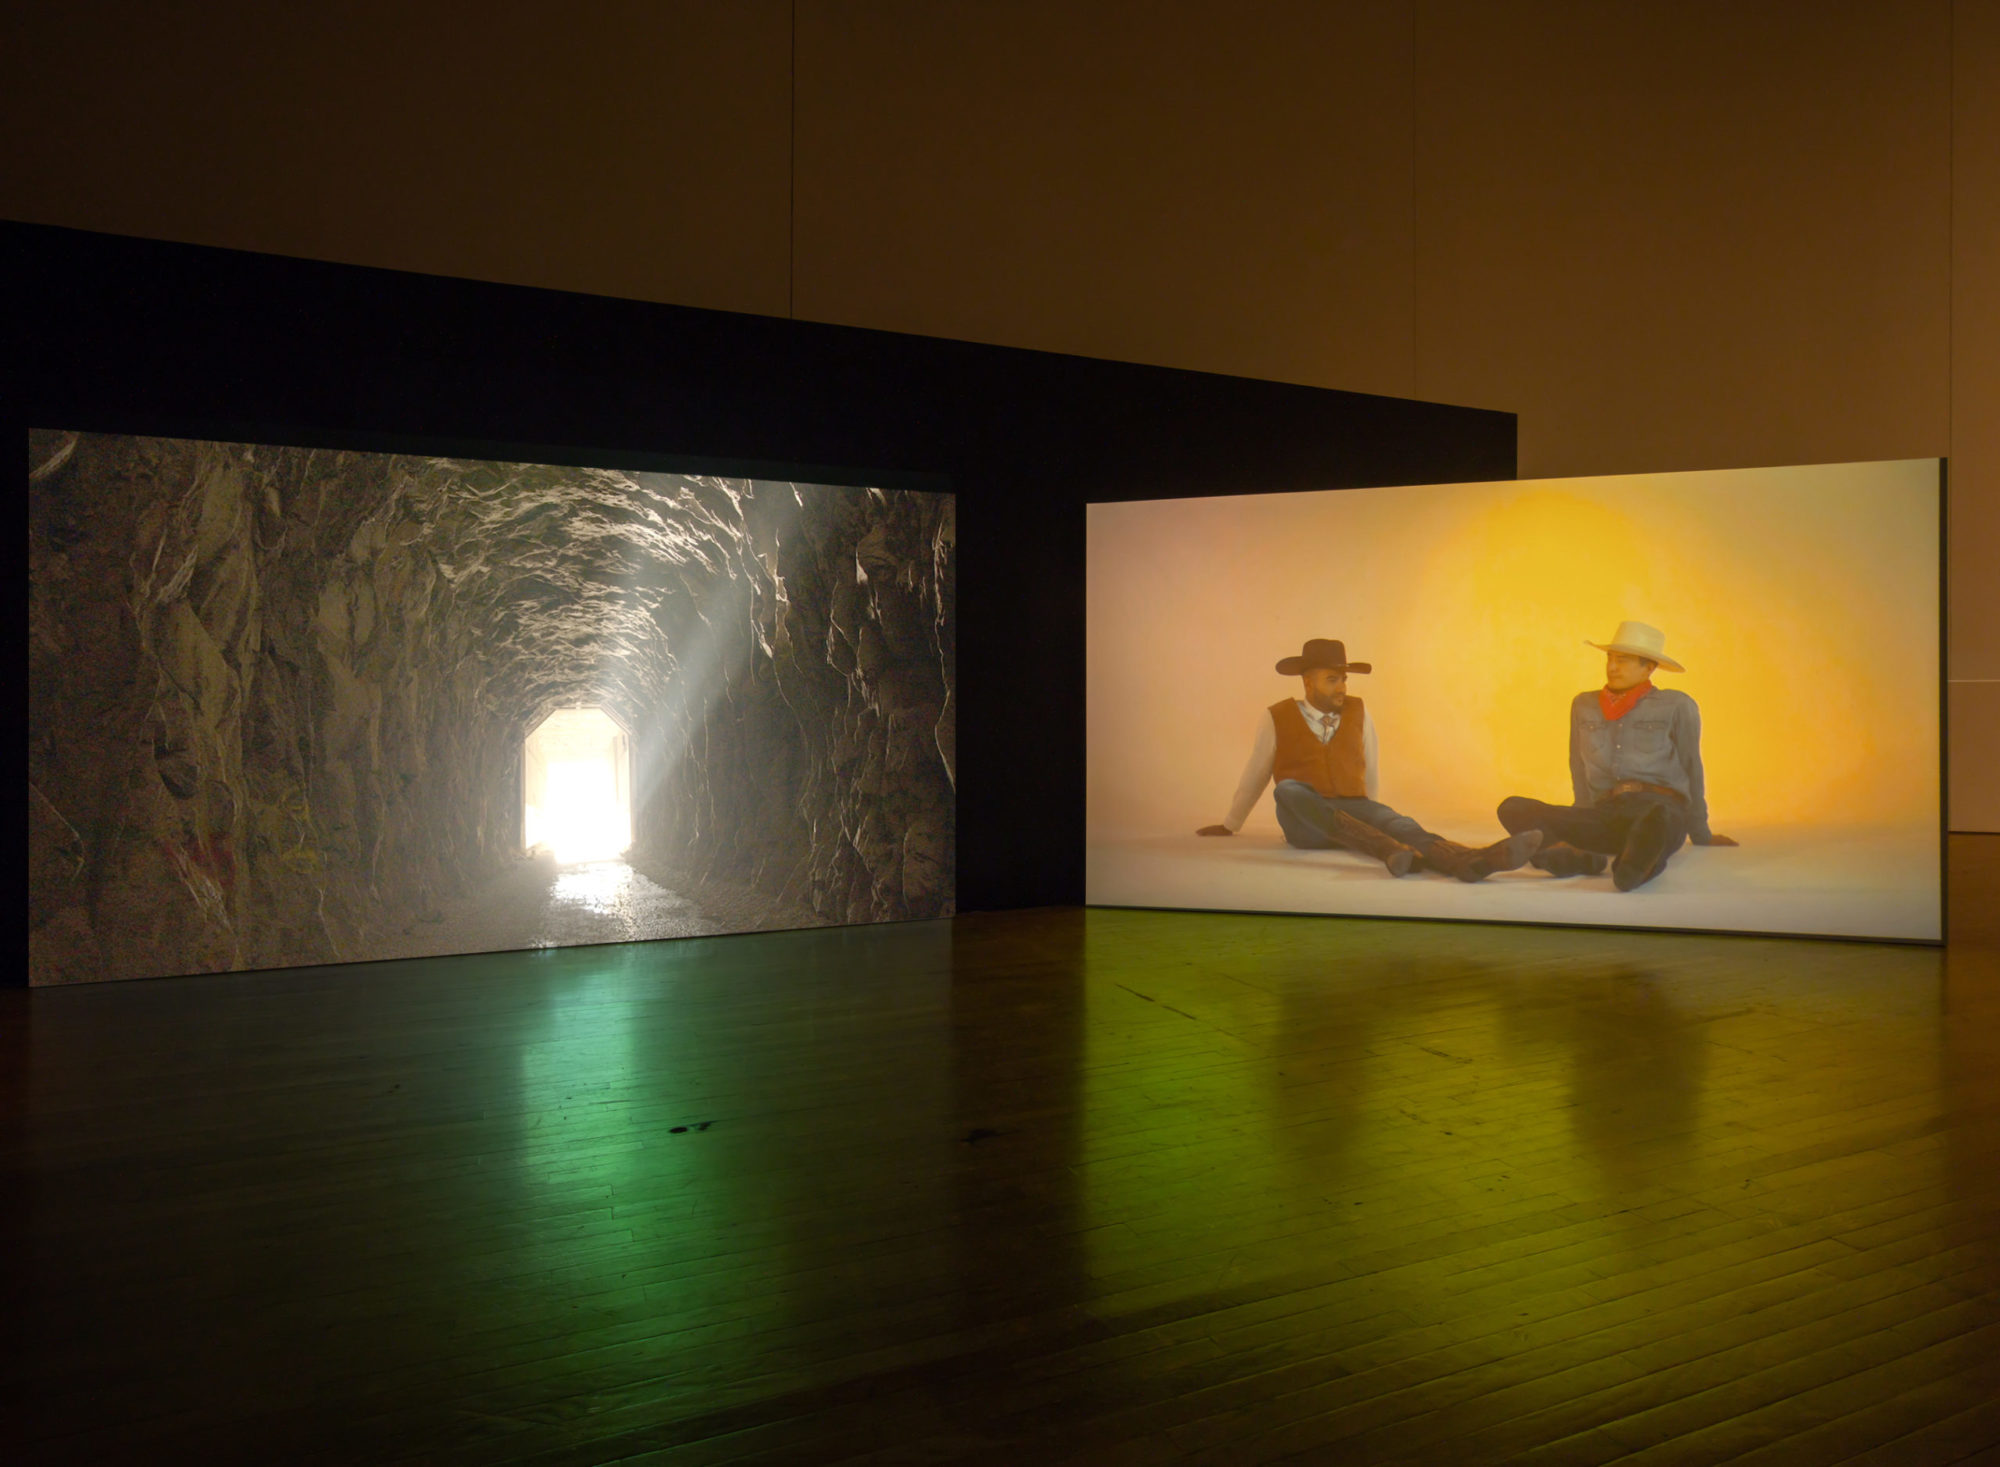 An installation view of Kenneth Tam's Silent Spikes at the Queen's Museum. Two screens are in view. The screen on the left is a view of the edge of a cave, the exit in view and light pouring in. The image on the right is two men sitting on the ground. The background is a warm orange yellow. The man on the left wears boots, jeans, a white shirt, a brown vest, and a dark hat. The man on the right wears boots, dark jeans, a chambray shirt, a red bandana around his neck, and a light hat.